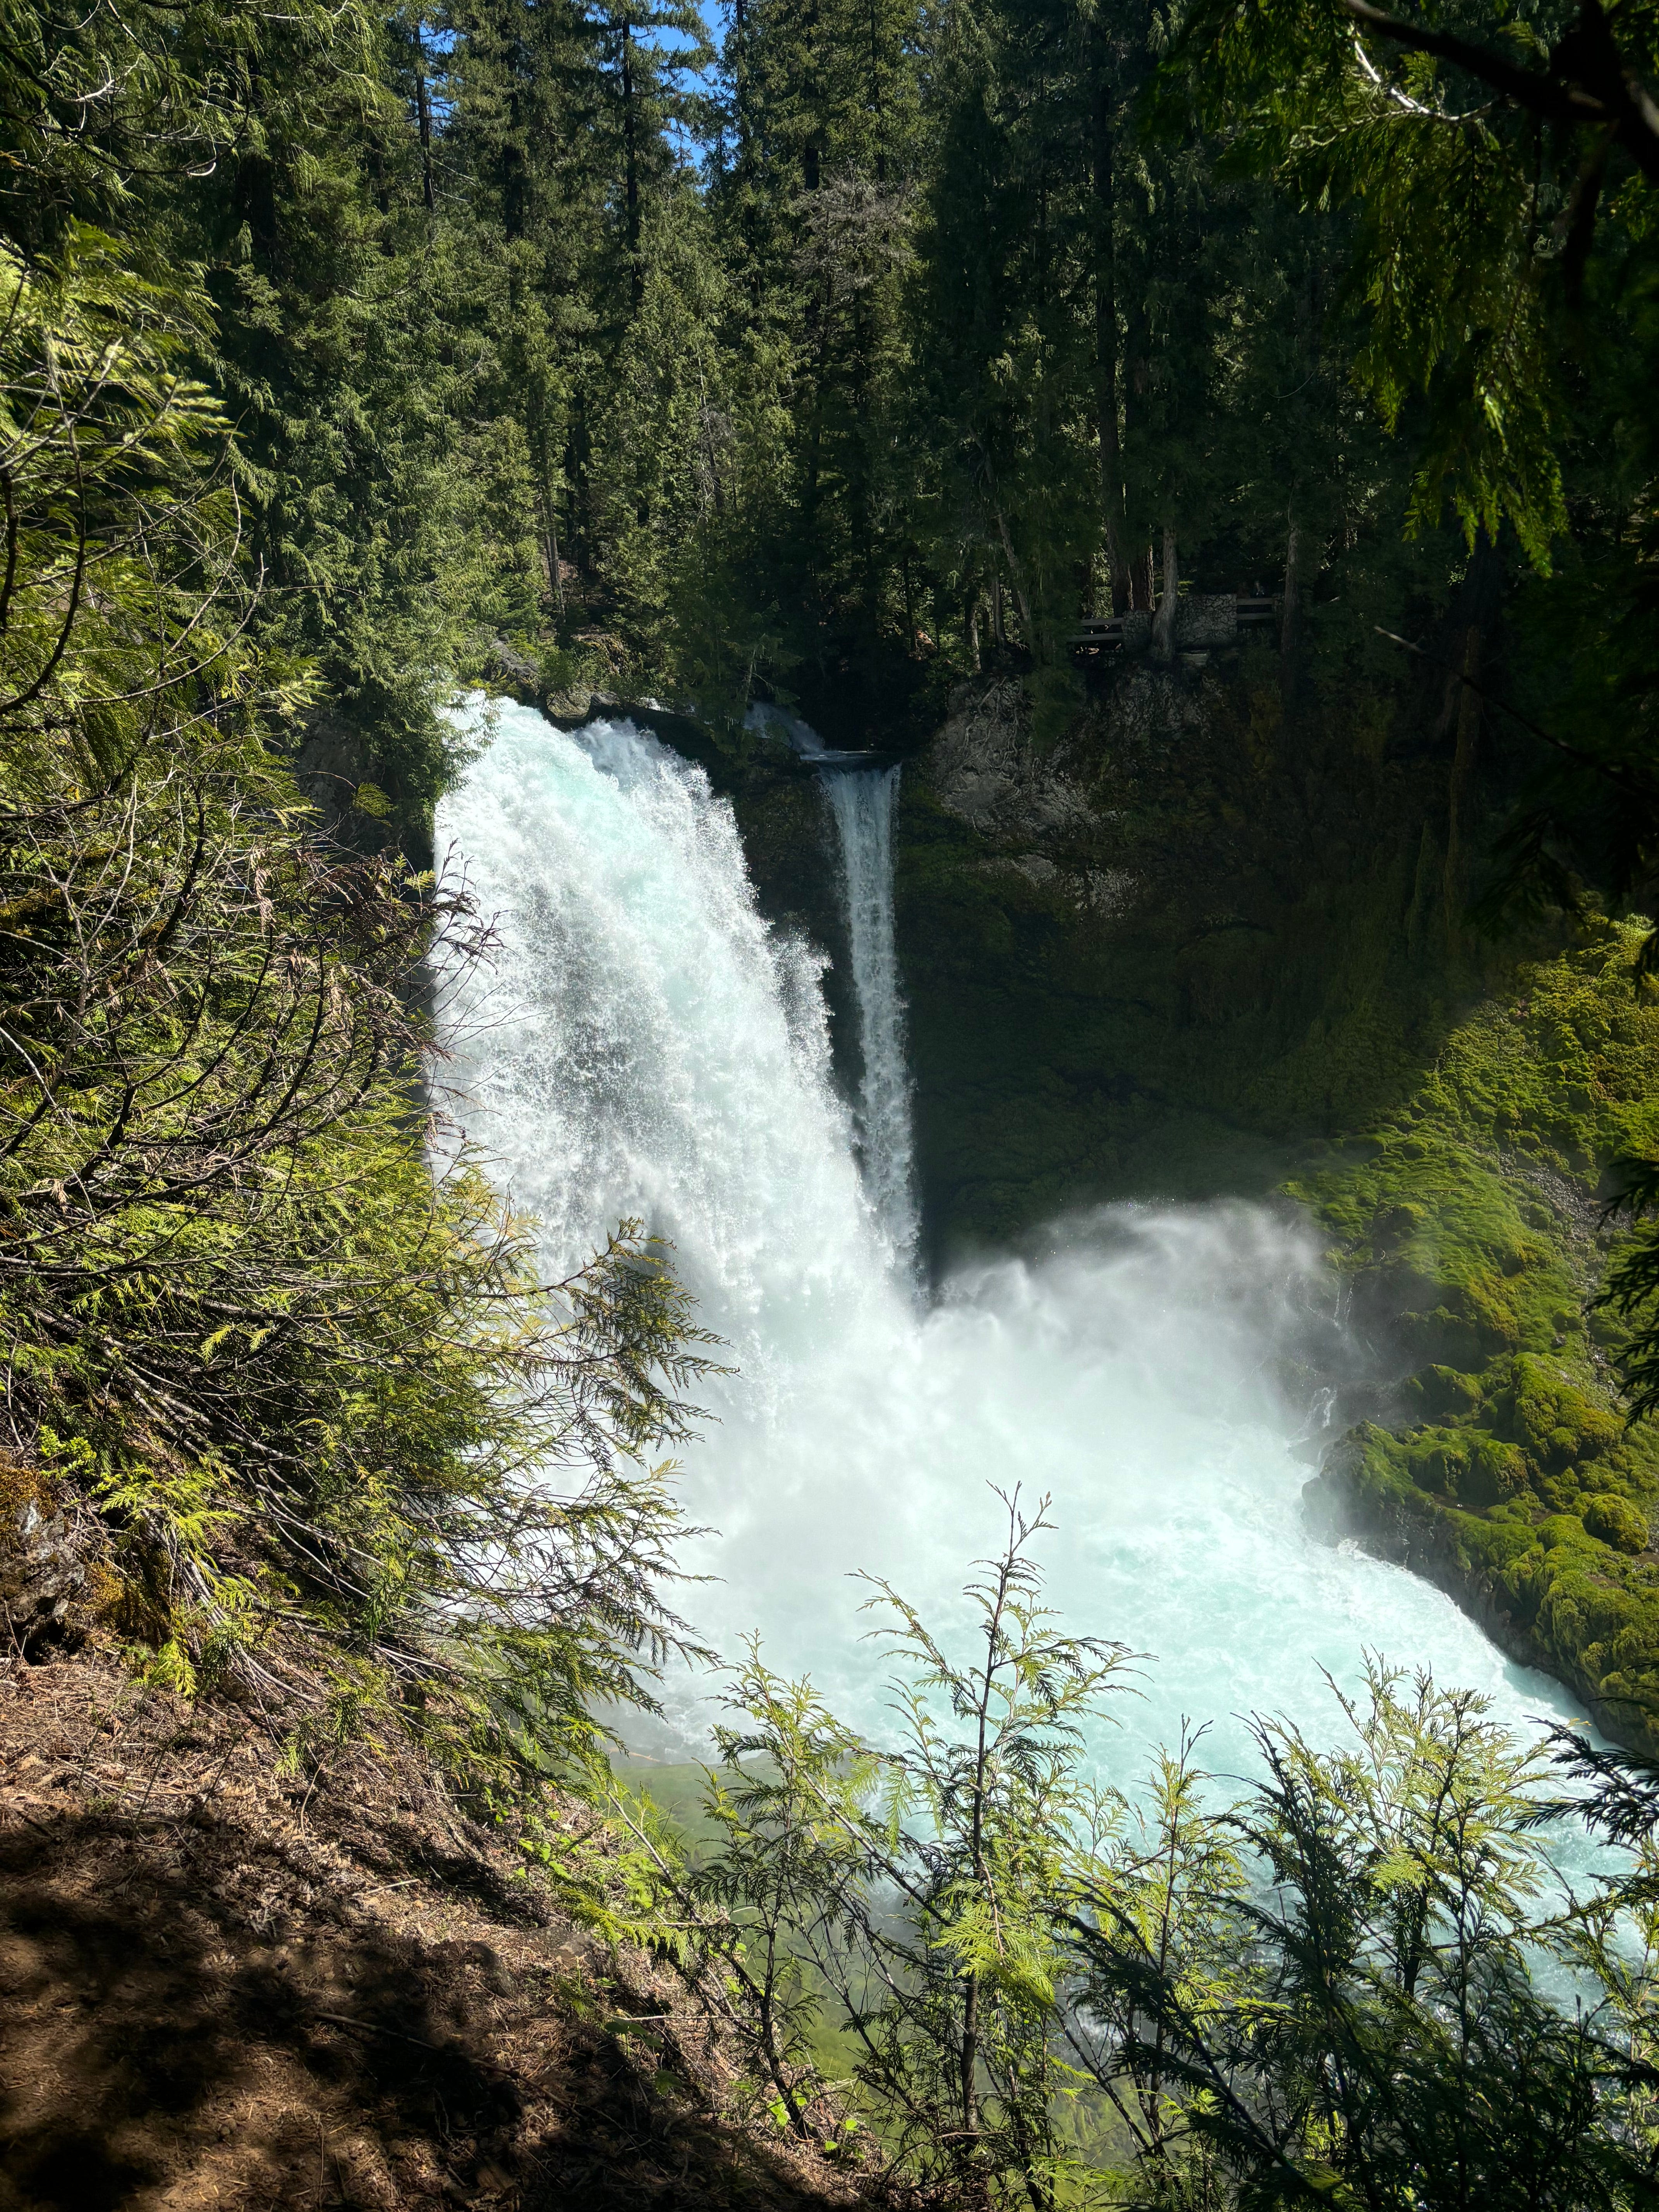 74-year-old man rescued after falling 40 feet near base of Sahalie Falls